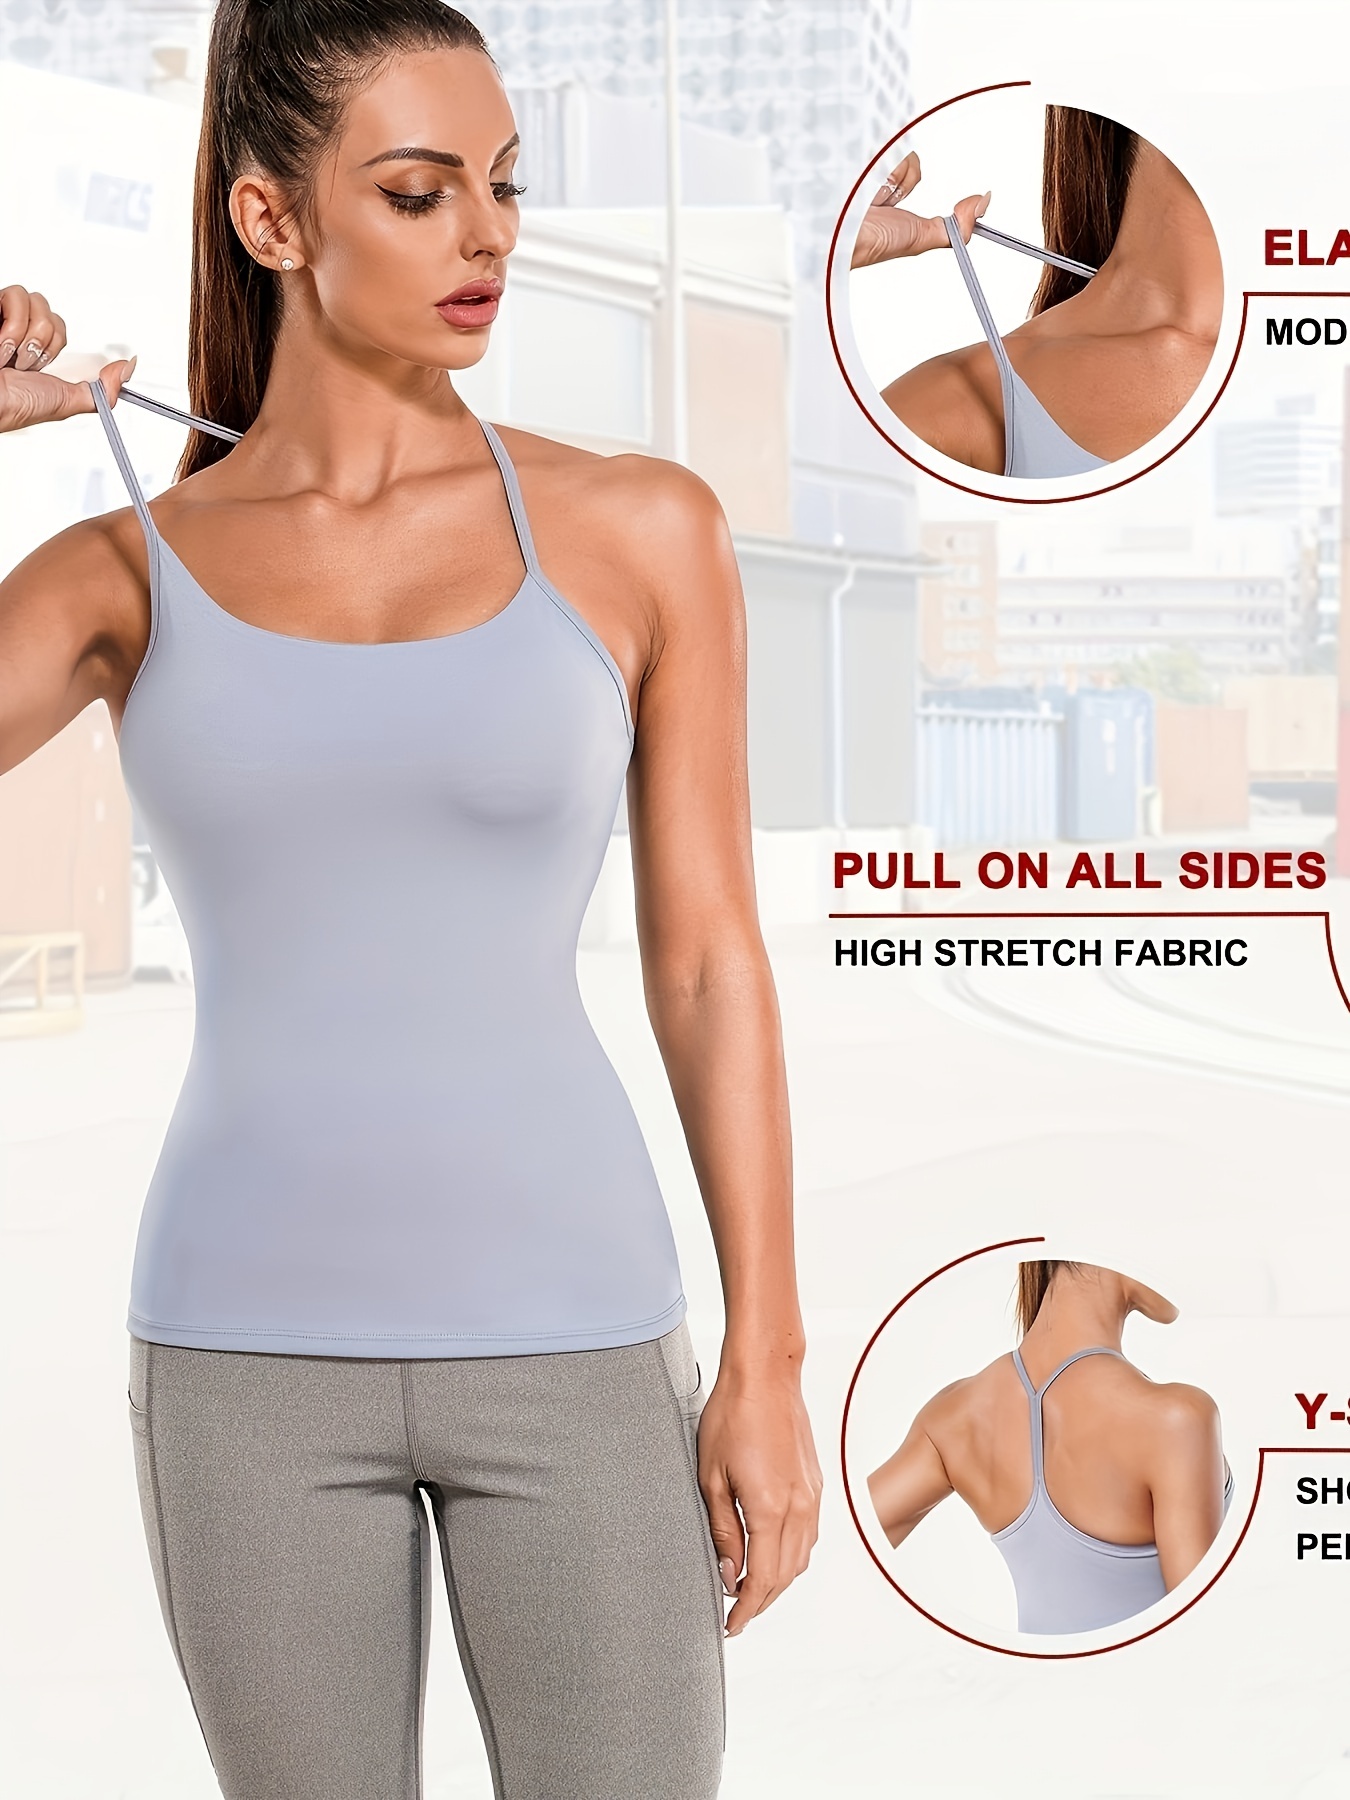 Solid Workout Tank Tops For Women, Built In Bra Cami Top Yoga Shirts,  Athletic Racerback Tank Running Sports Tops